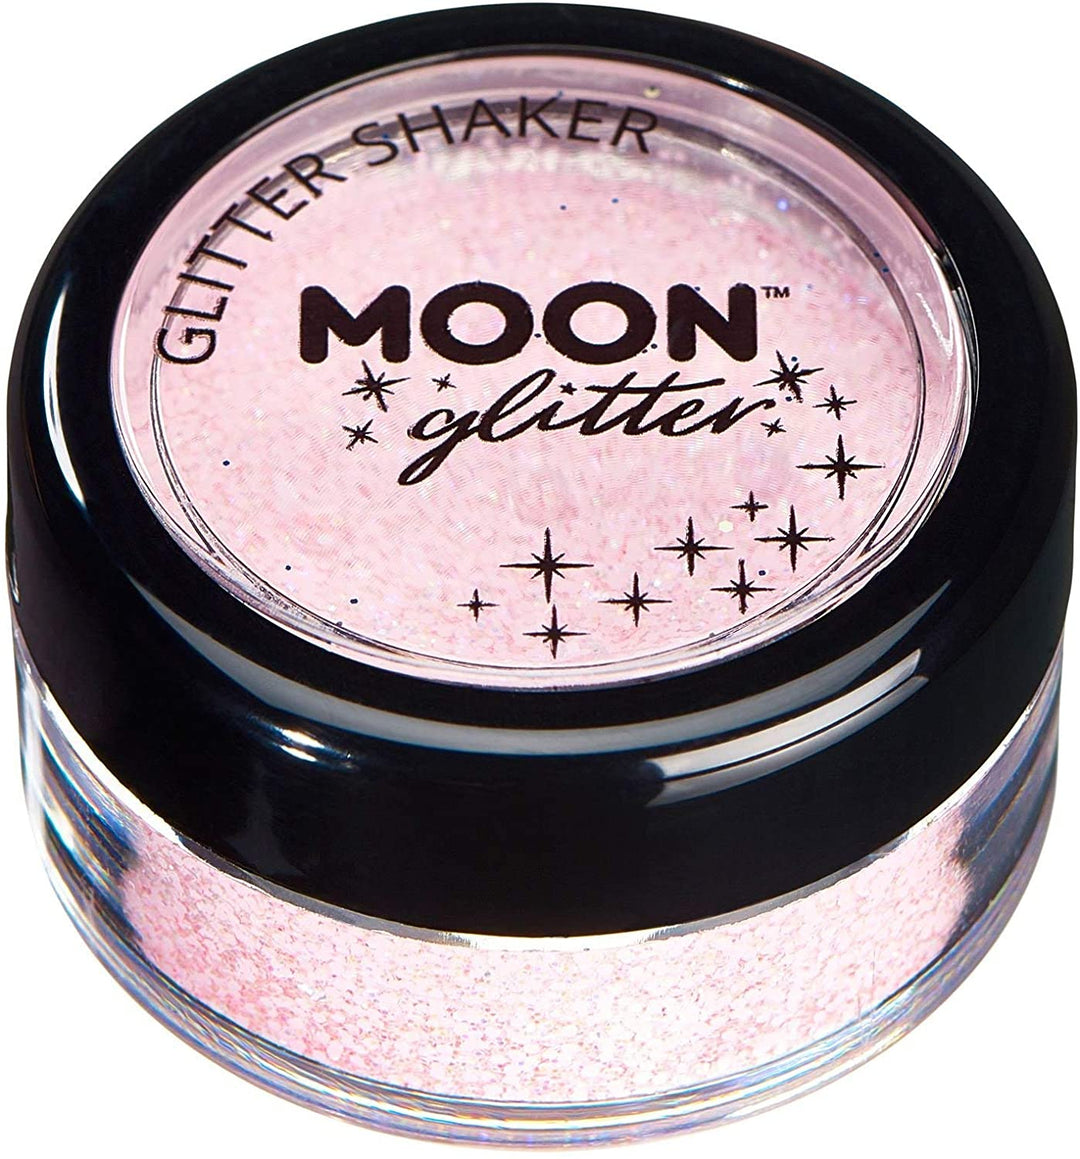 Pastel Glitter Shakers by Moon Glitter - Baby Pink - Cosmetic Festival Makeup Glitter for Face, Body, Nails, Hair, Lips - 5g